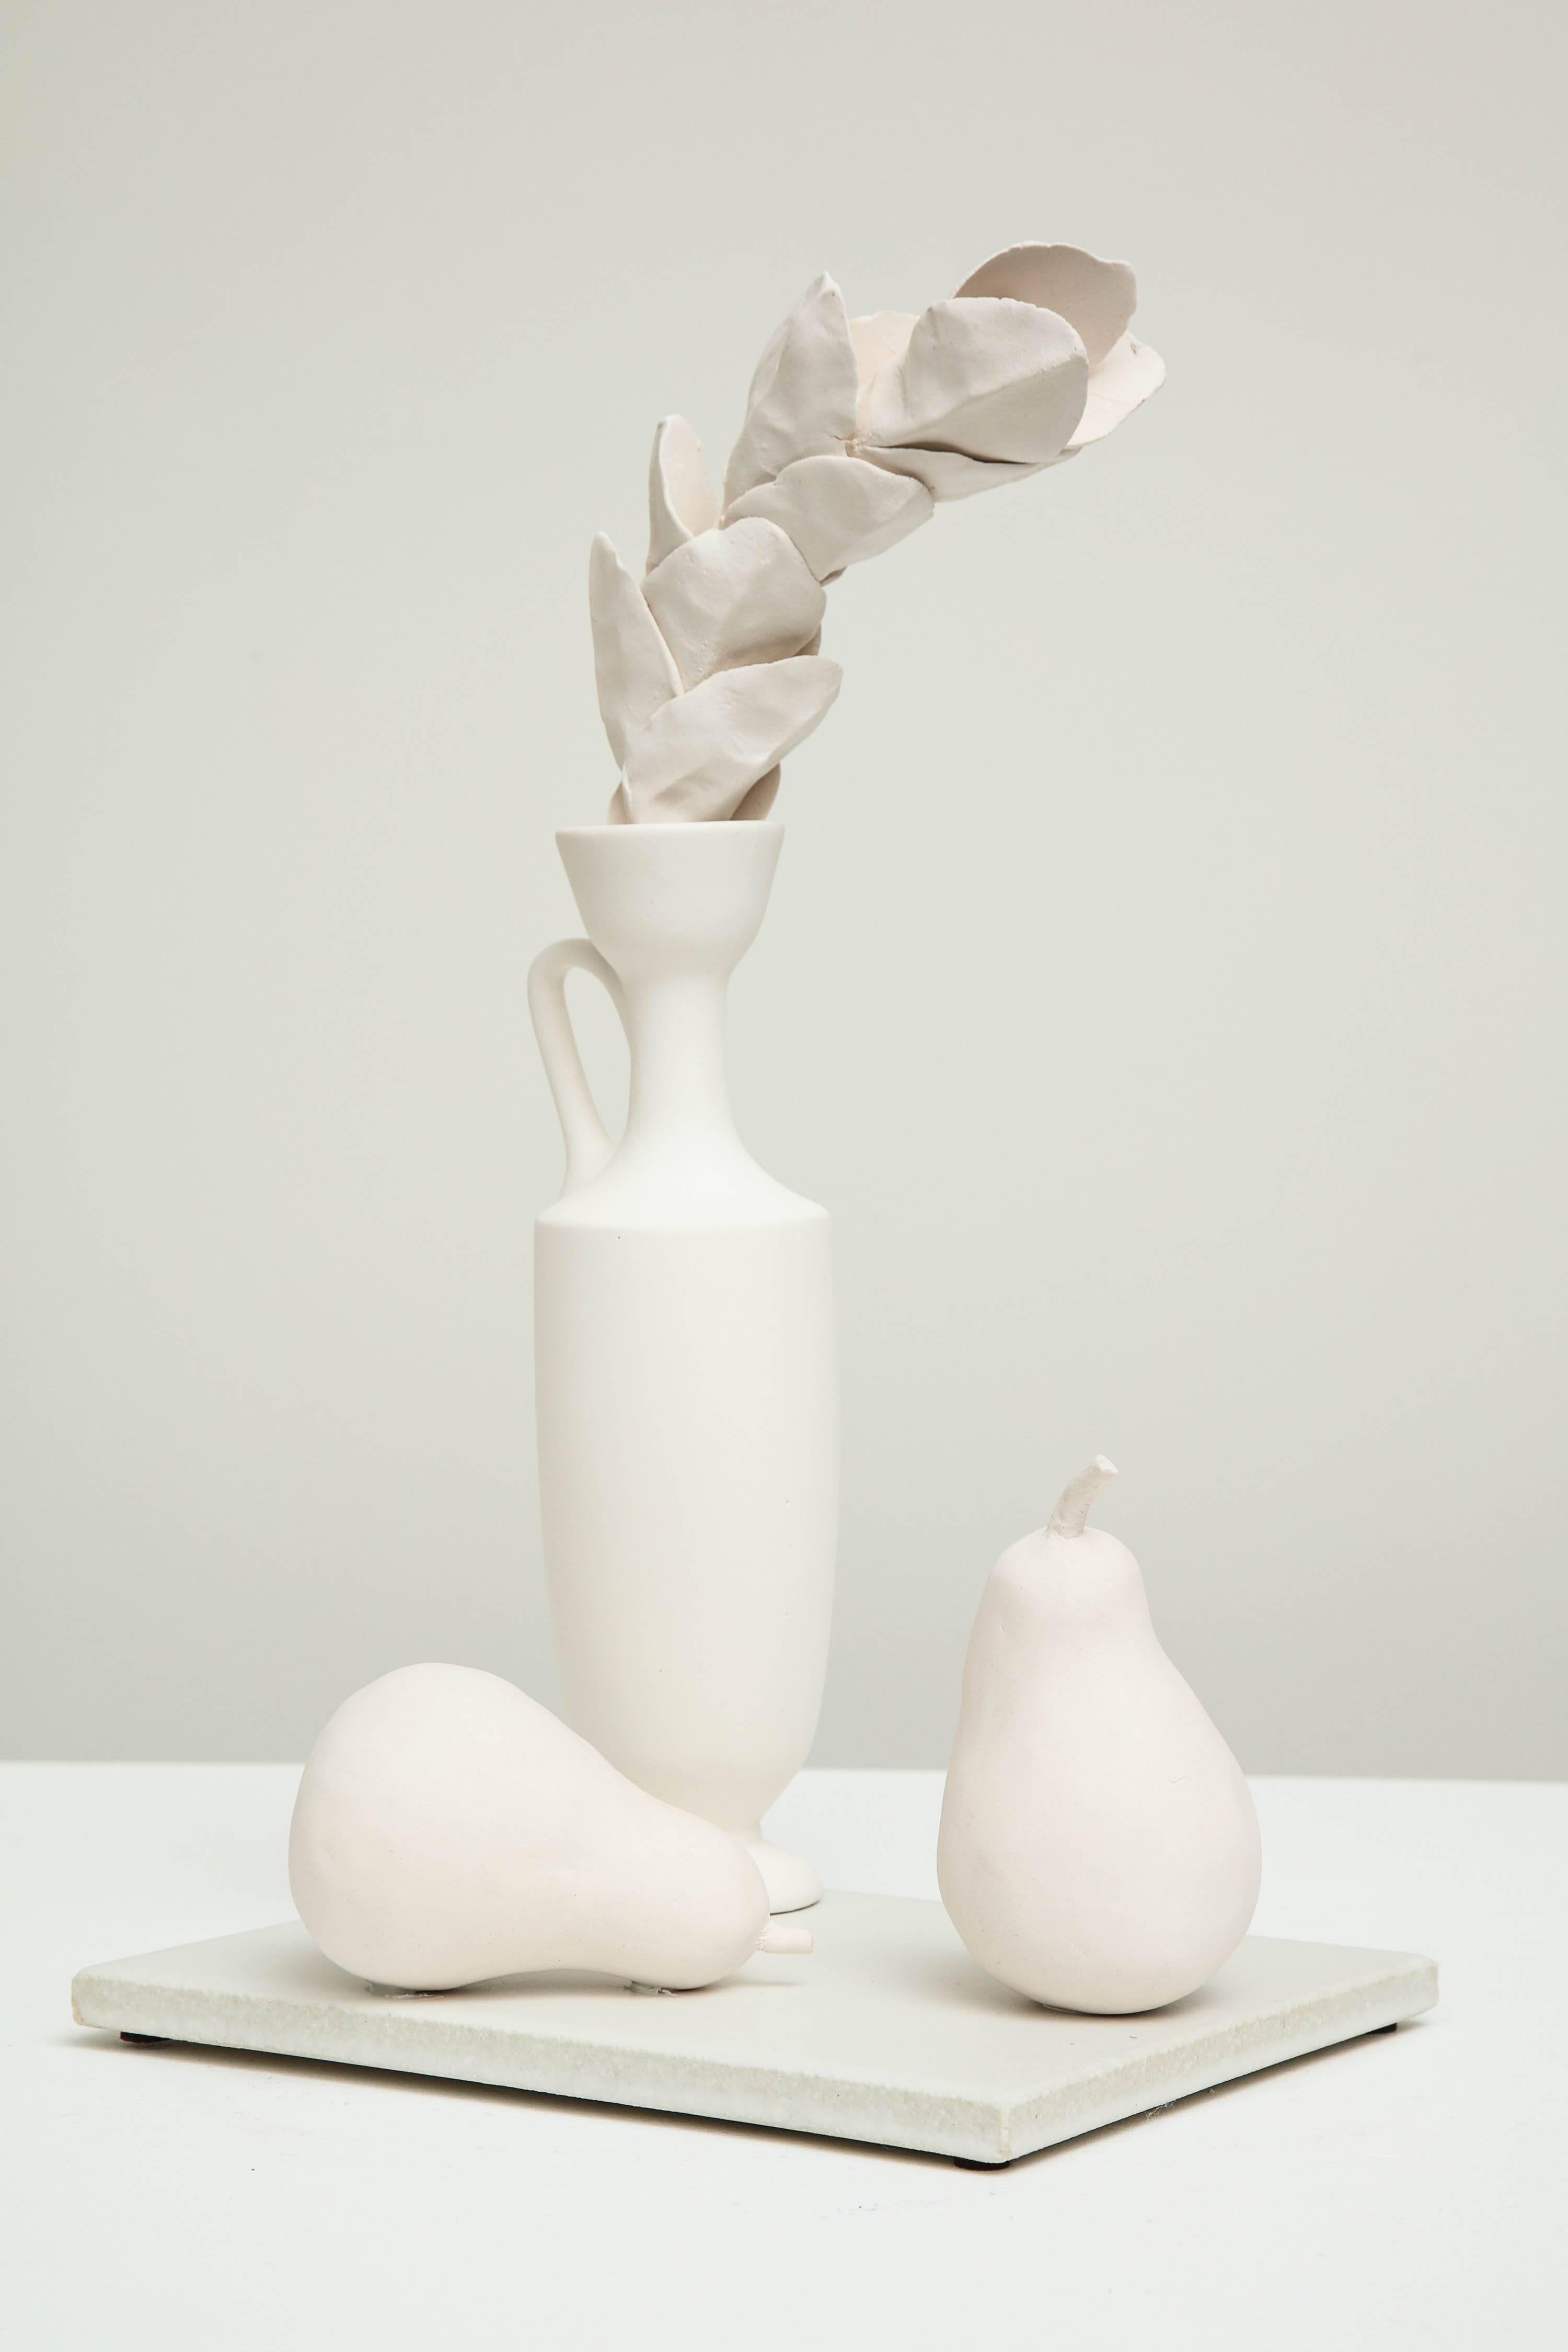 Fired Still Life in White with Lekythos, Branch, and Two Pears by Anat Shiftan, 2017